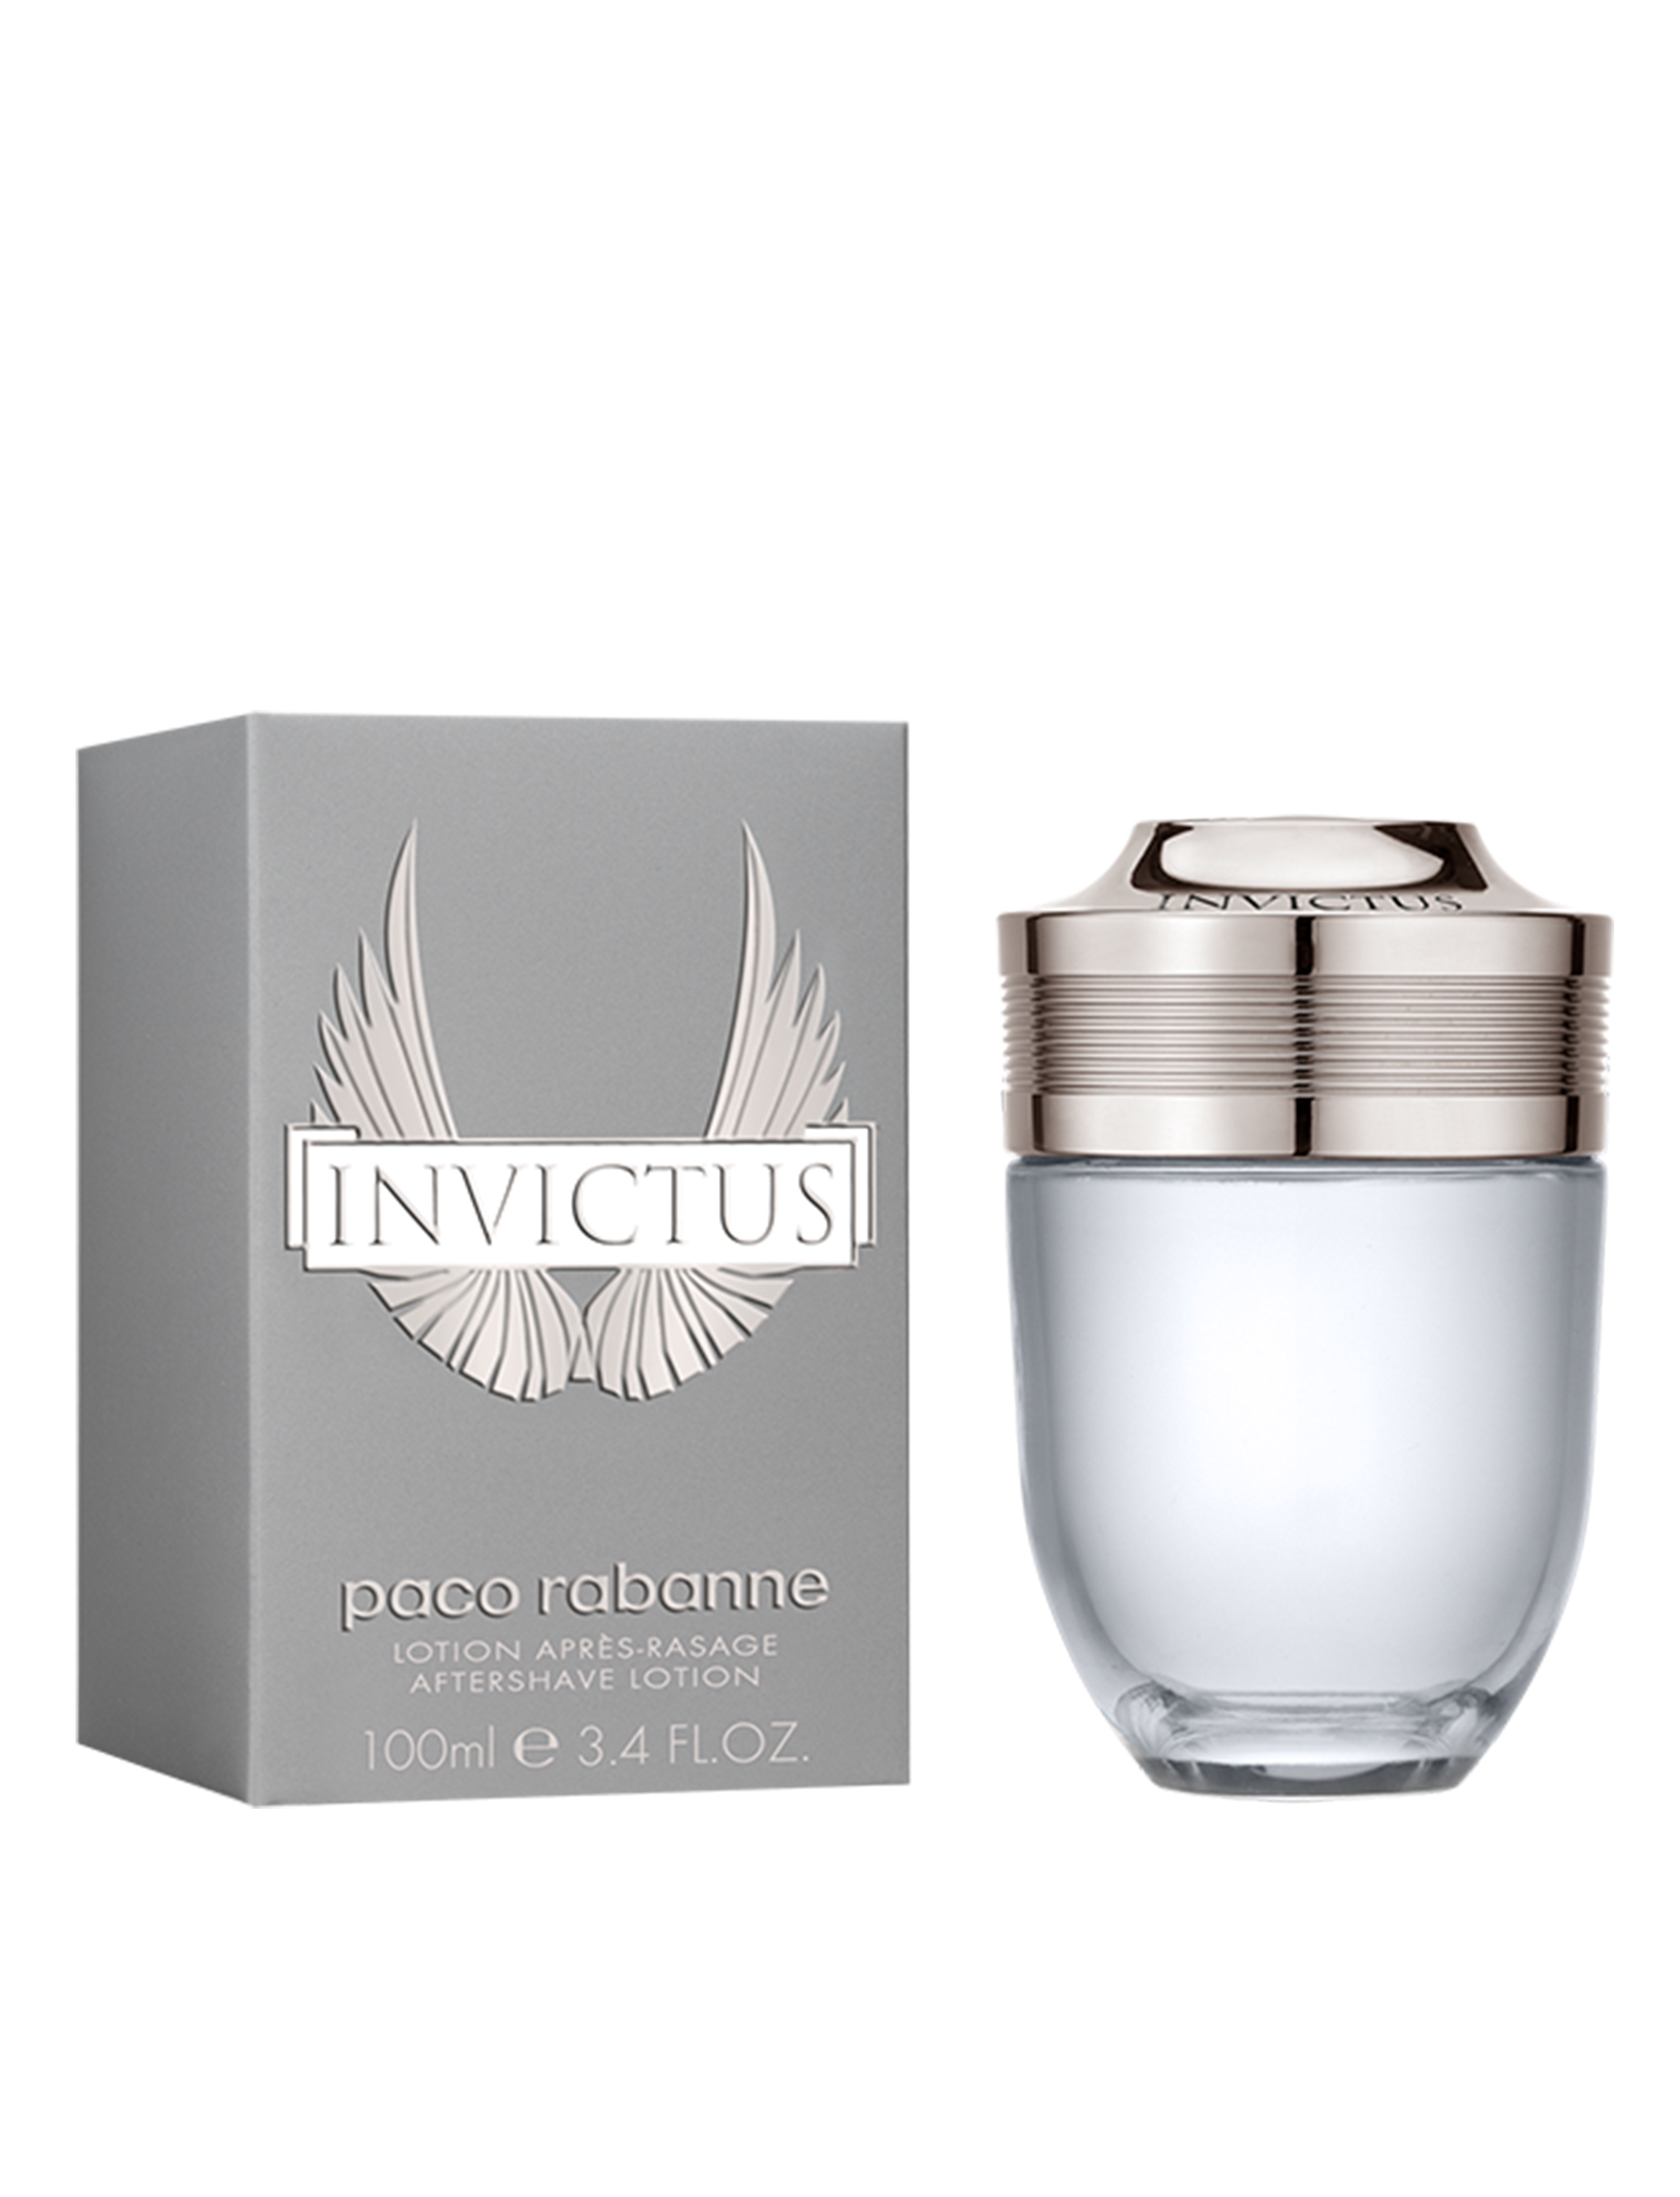 Paco Rabanne Invictus Aftershave Lotion